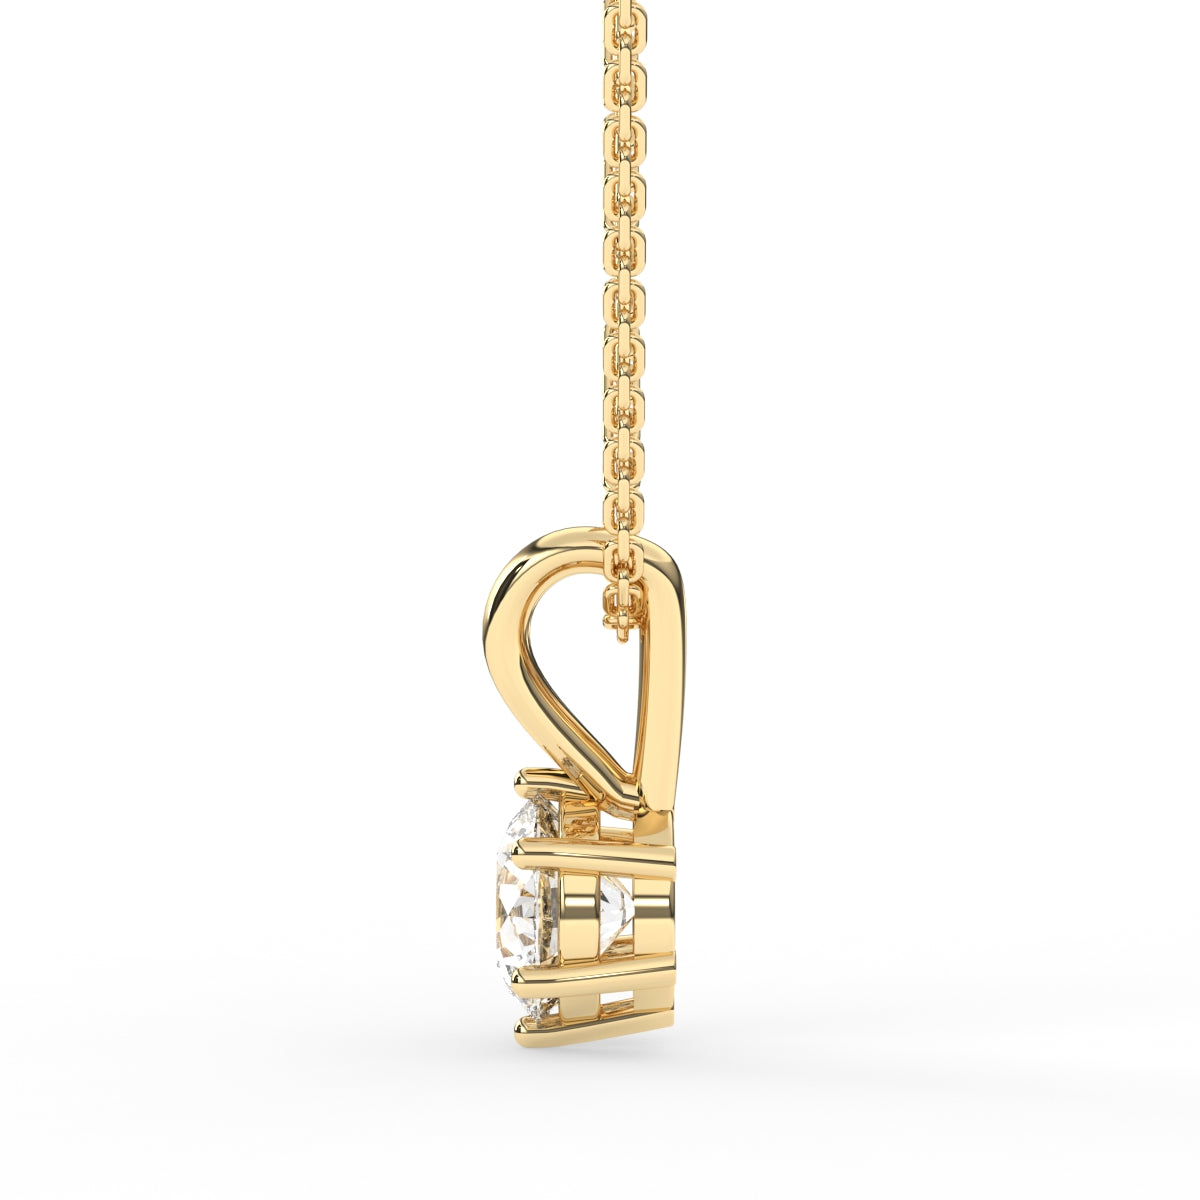 Forever One Soliaire Diamond Pendant For Her